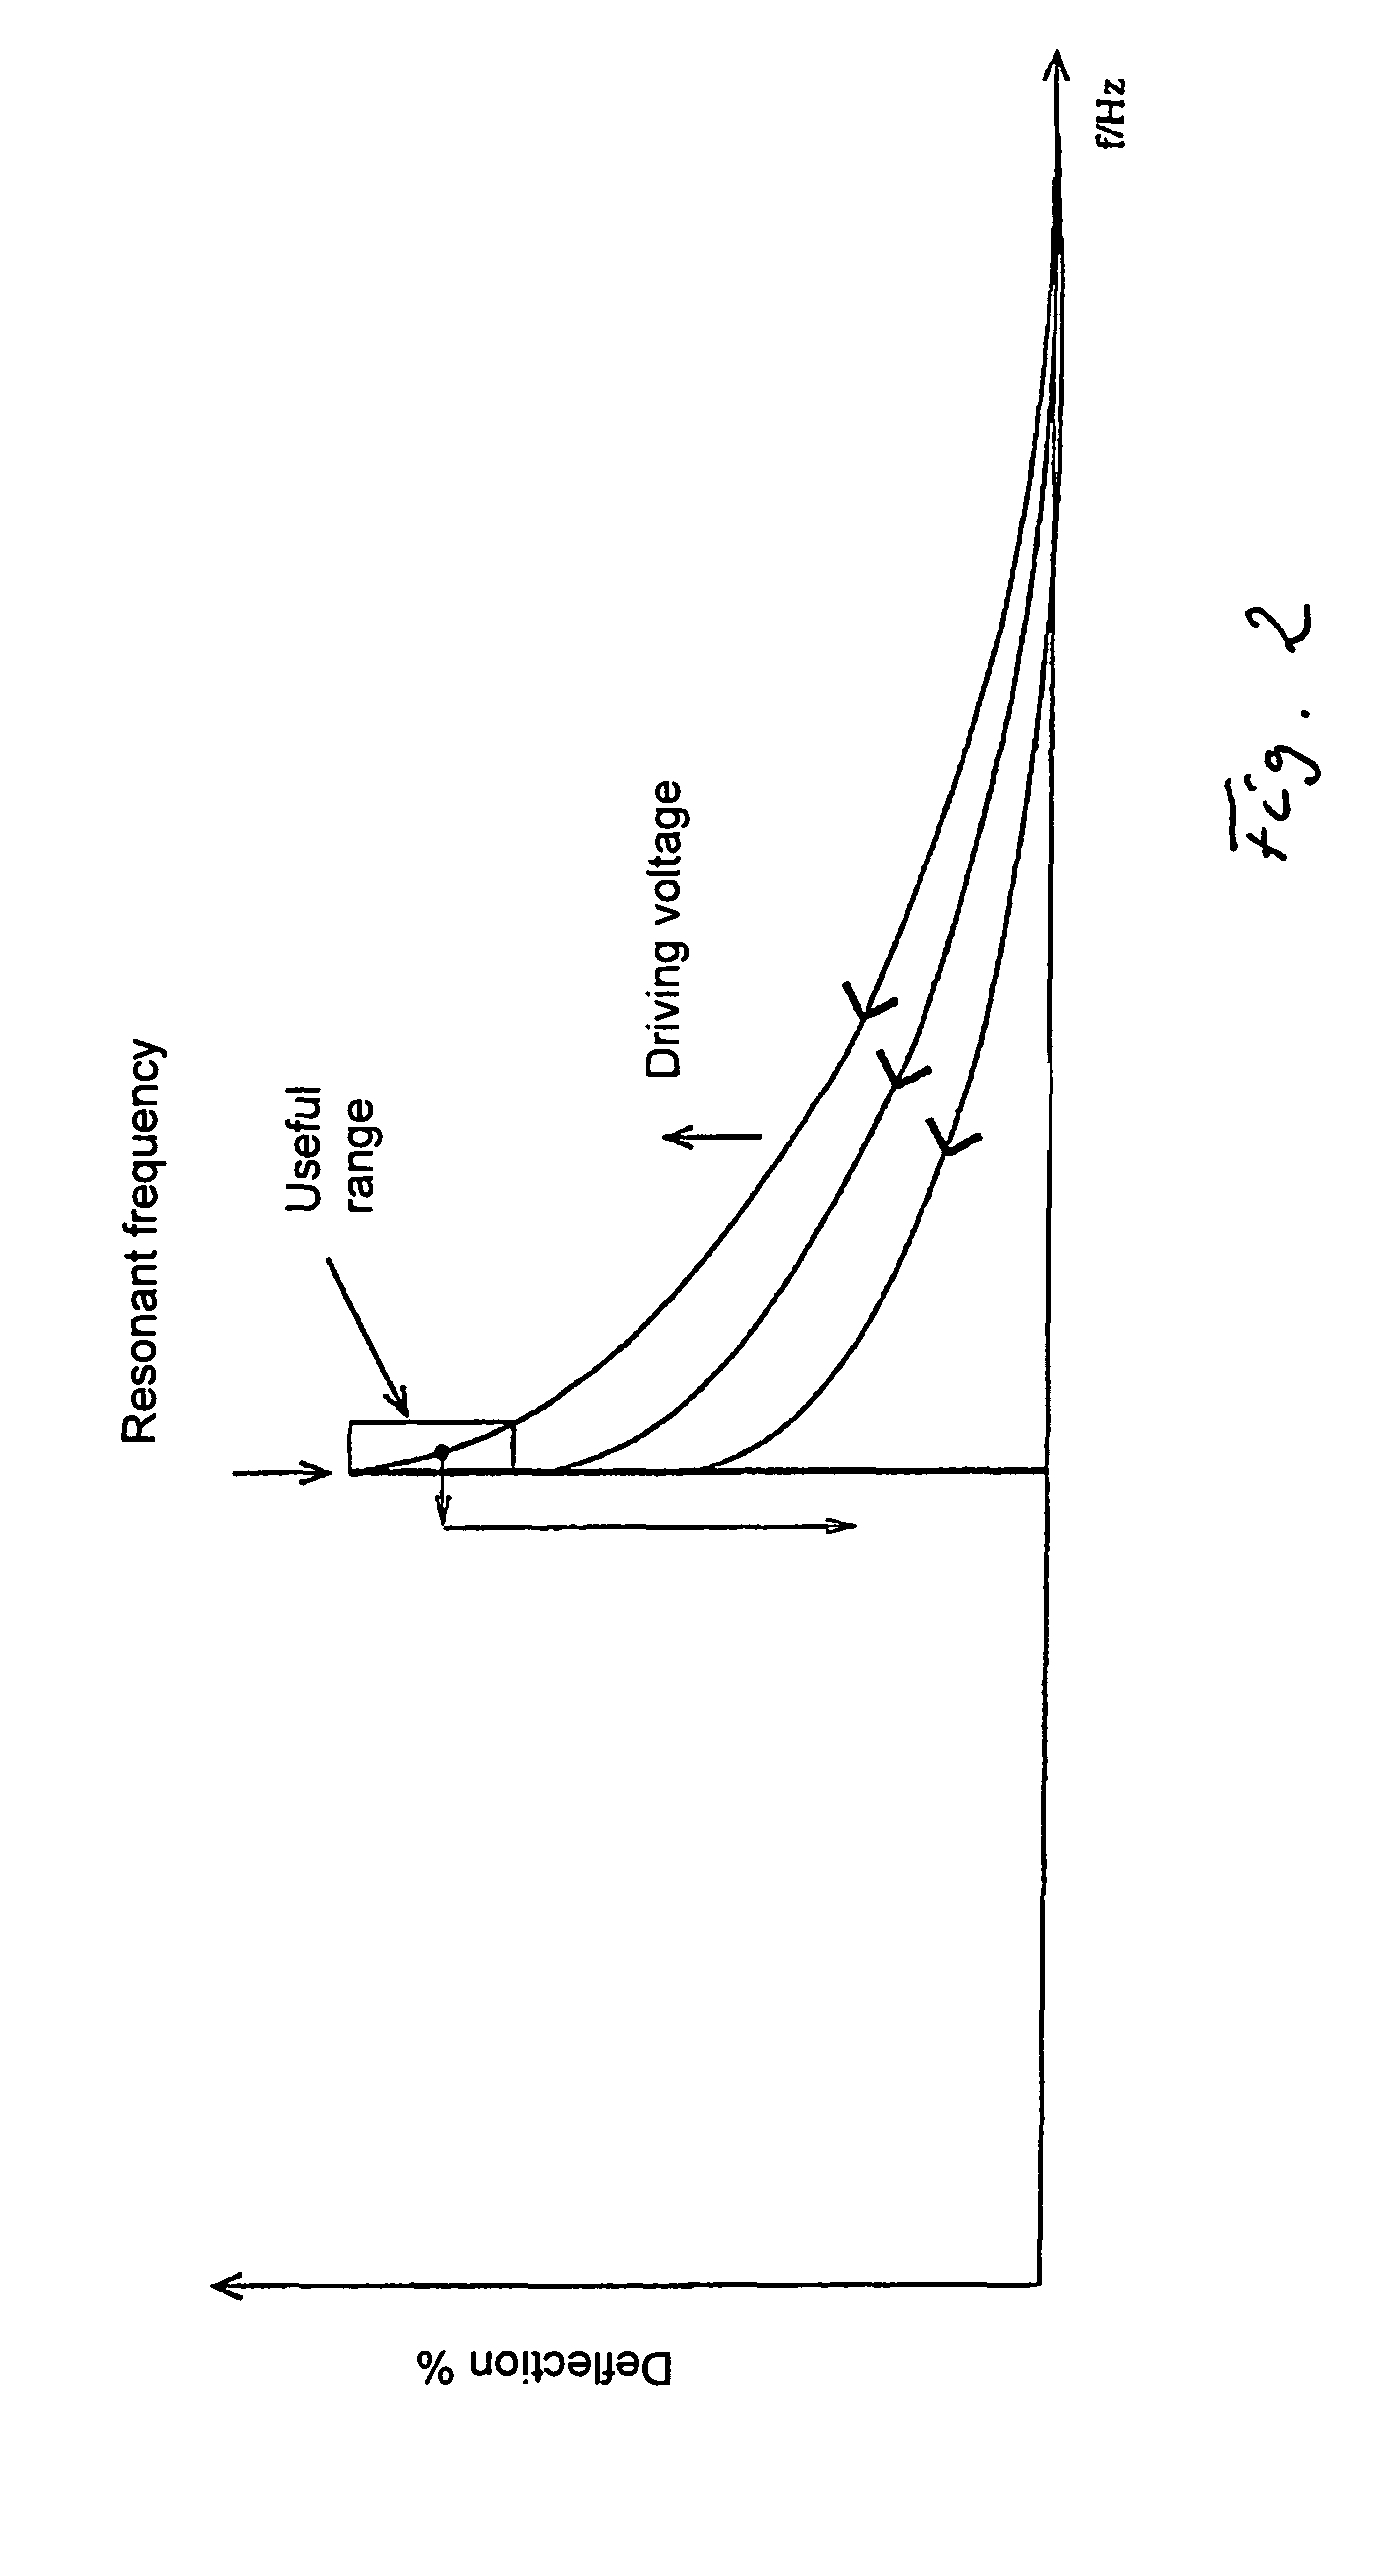 Oscillating, deflectable micromechanical element and method for use thereof